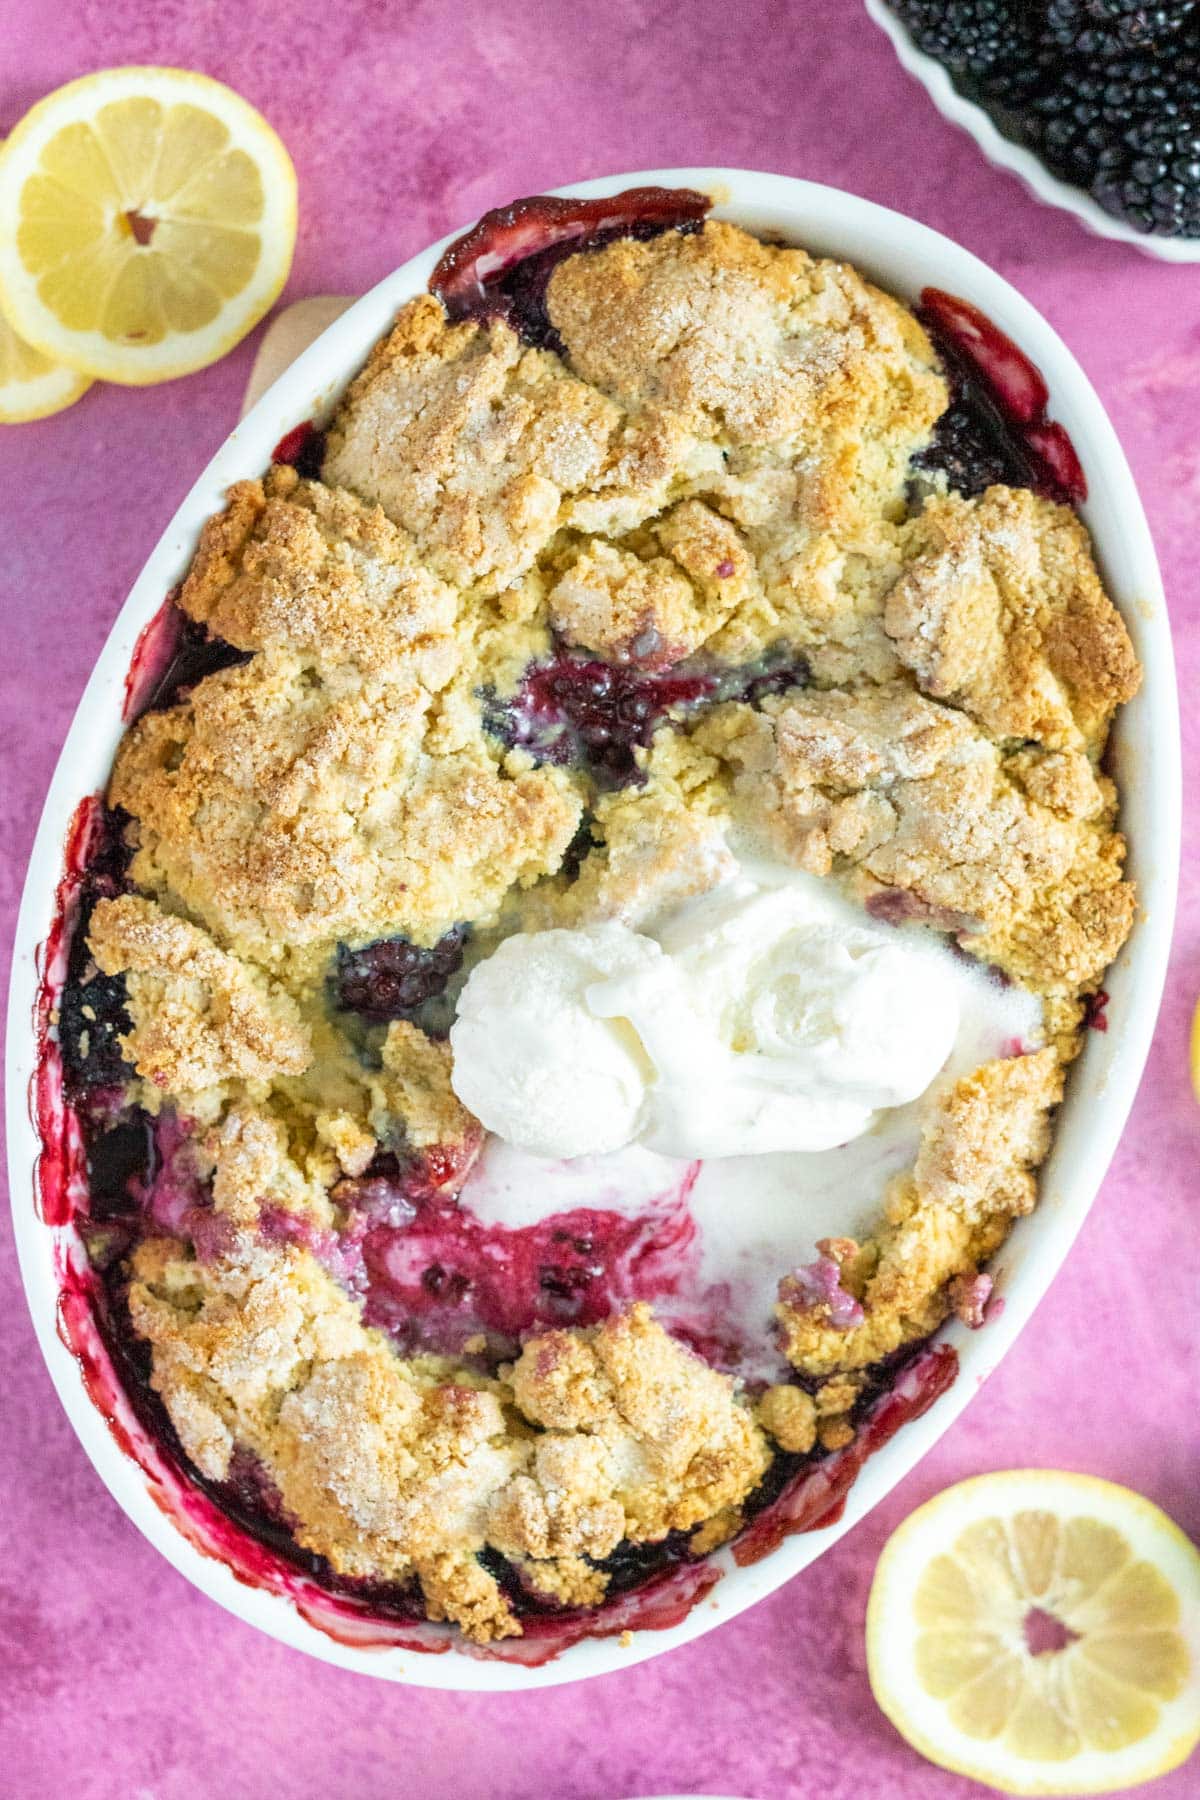 Gluten free berry cobbler in a baking dish with lemon slices and a bowl of berries.